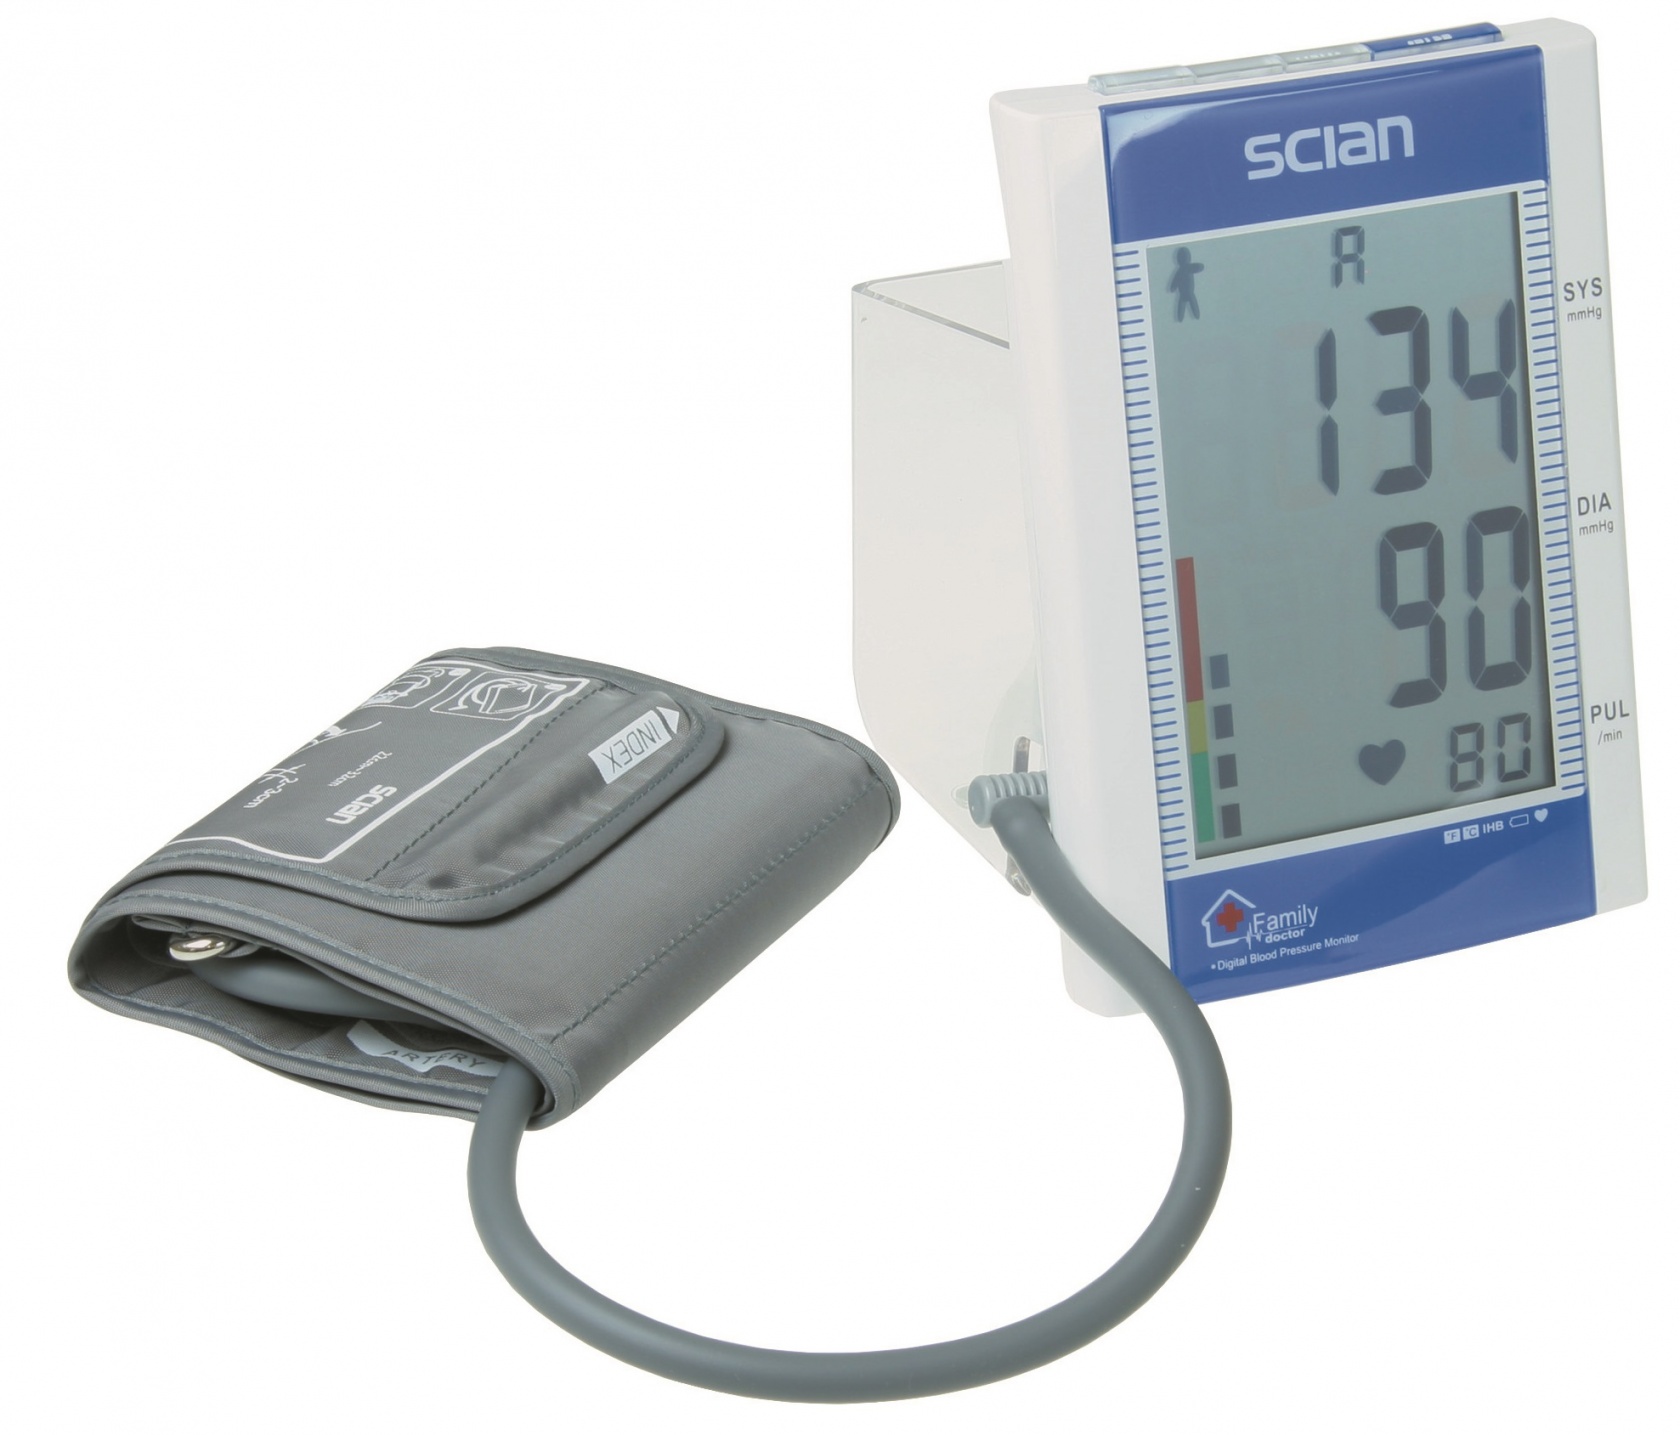 Scian Basic Digital BP Monitor with D Cuff image 1